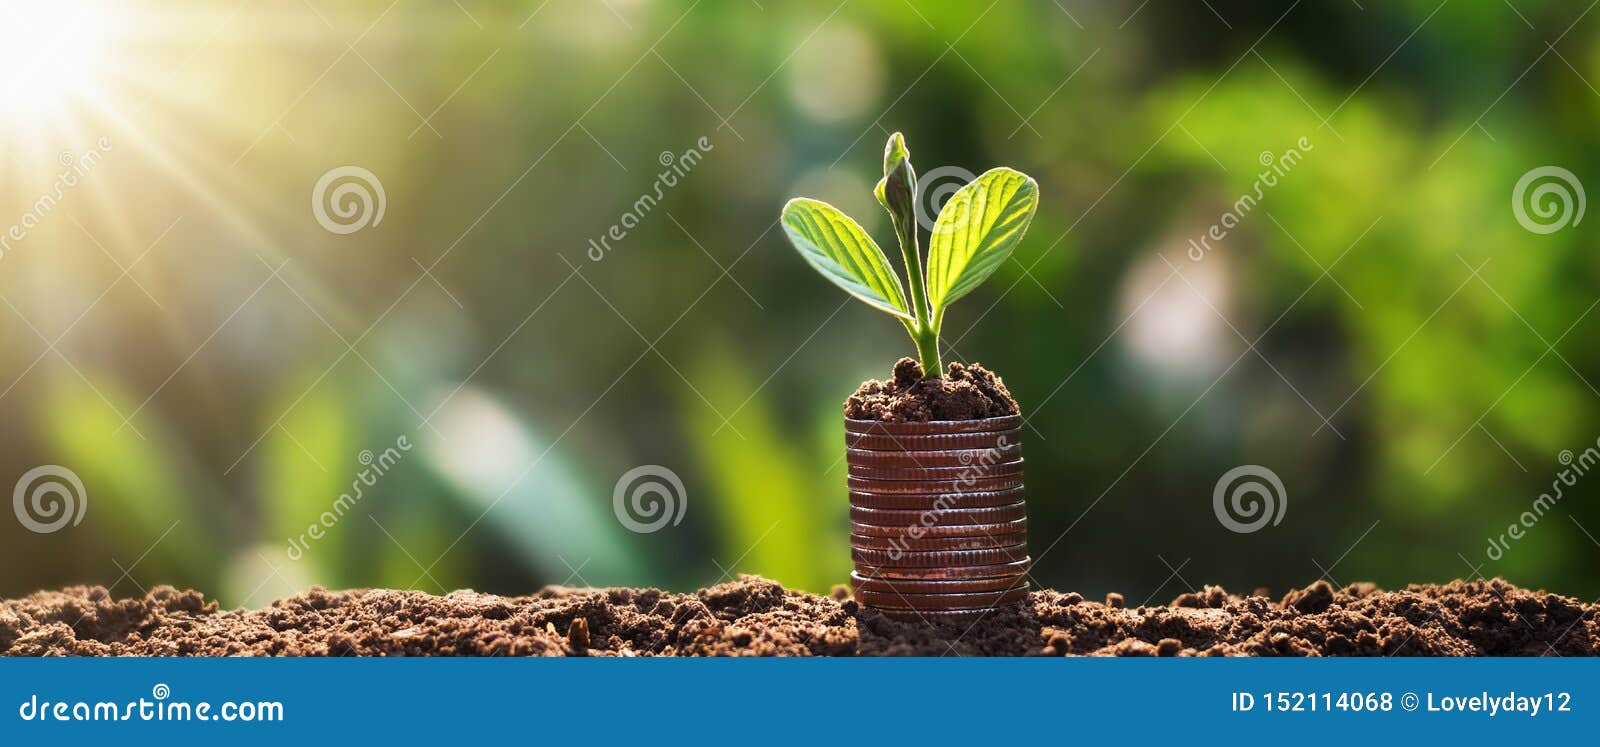 young plant grow on coins with sunrise. finance and accounting concept